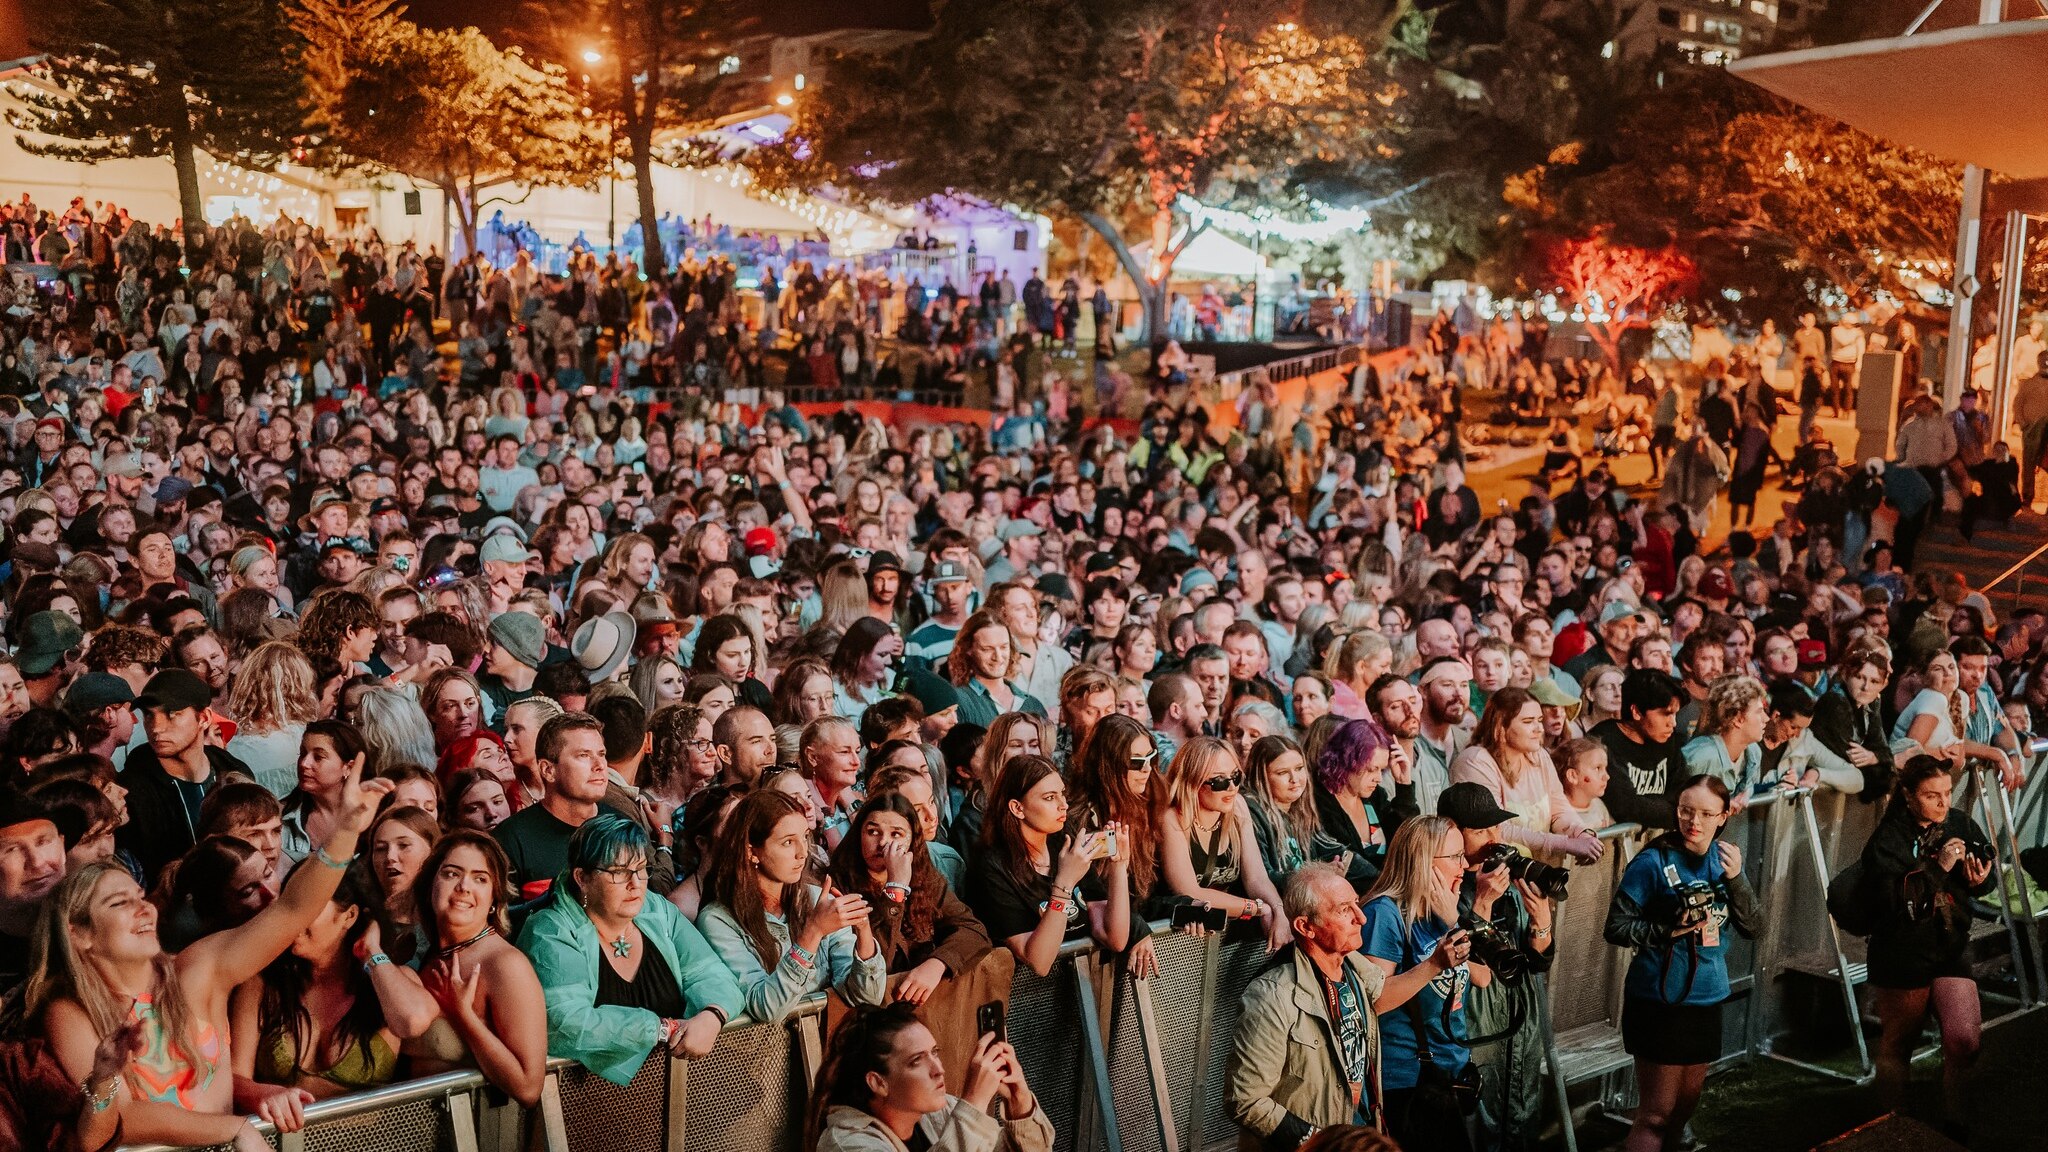 caloundra music festival cancelled as 'tough' economy claims another major event